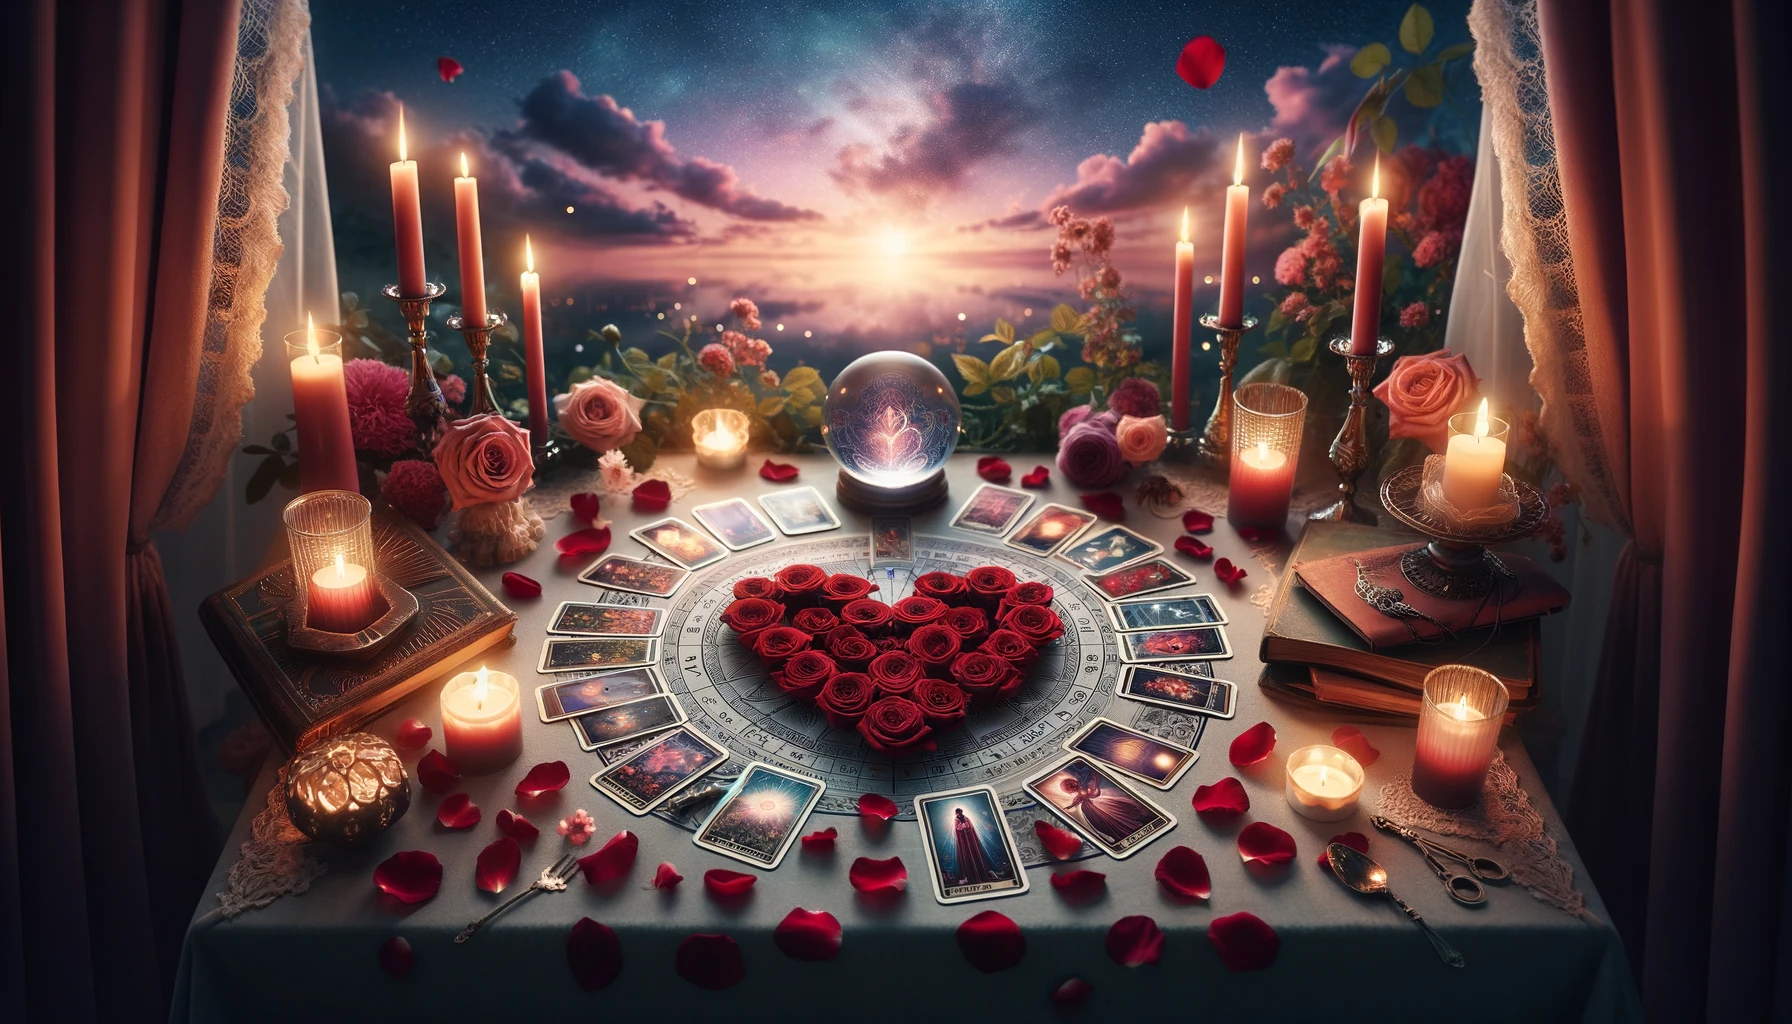 An image of a table with a heart shaped tarot spread surrounded by rose petals candles and a crystal ball set against a twilight backdrop. The tar